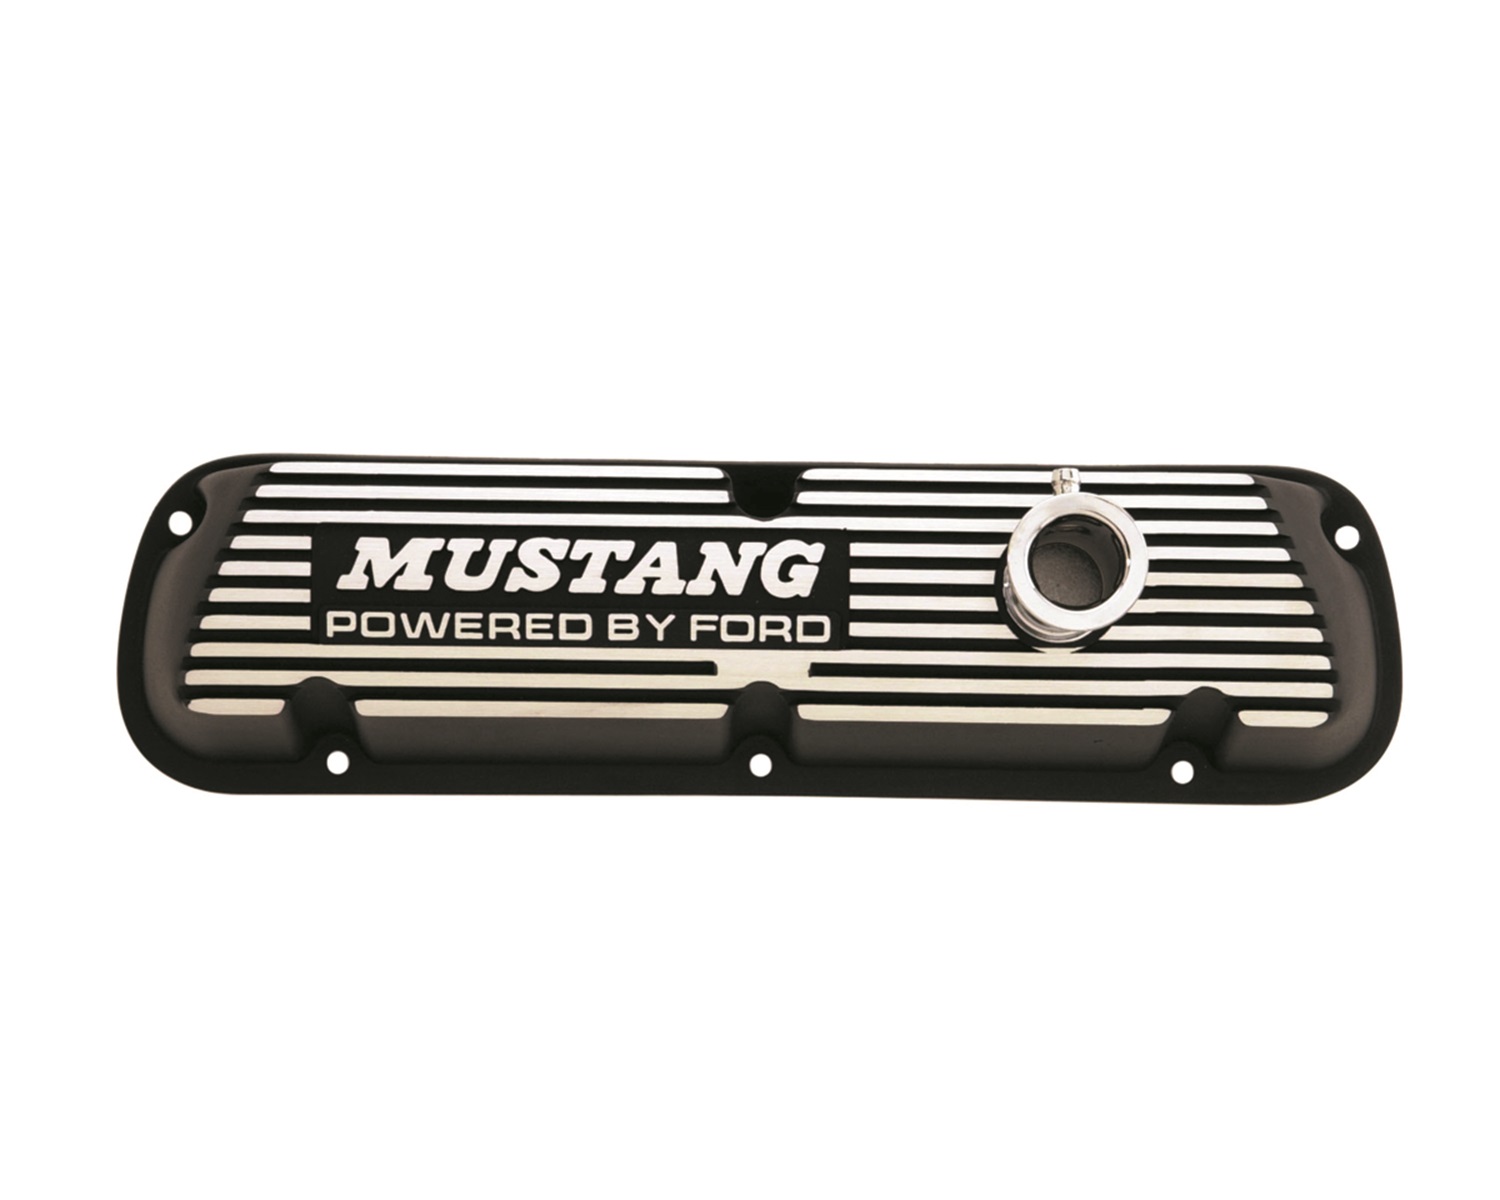 Ford Racing Ford Racing M-6000-E302 Valve Covers Fits 86-93 Mustang